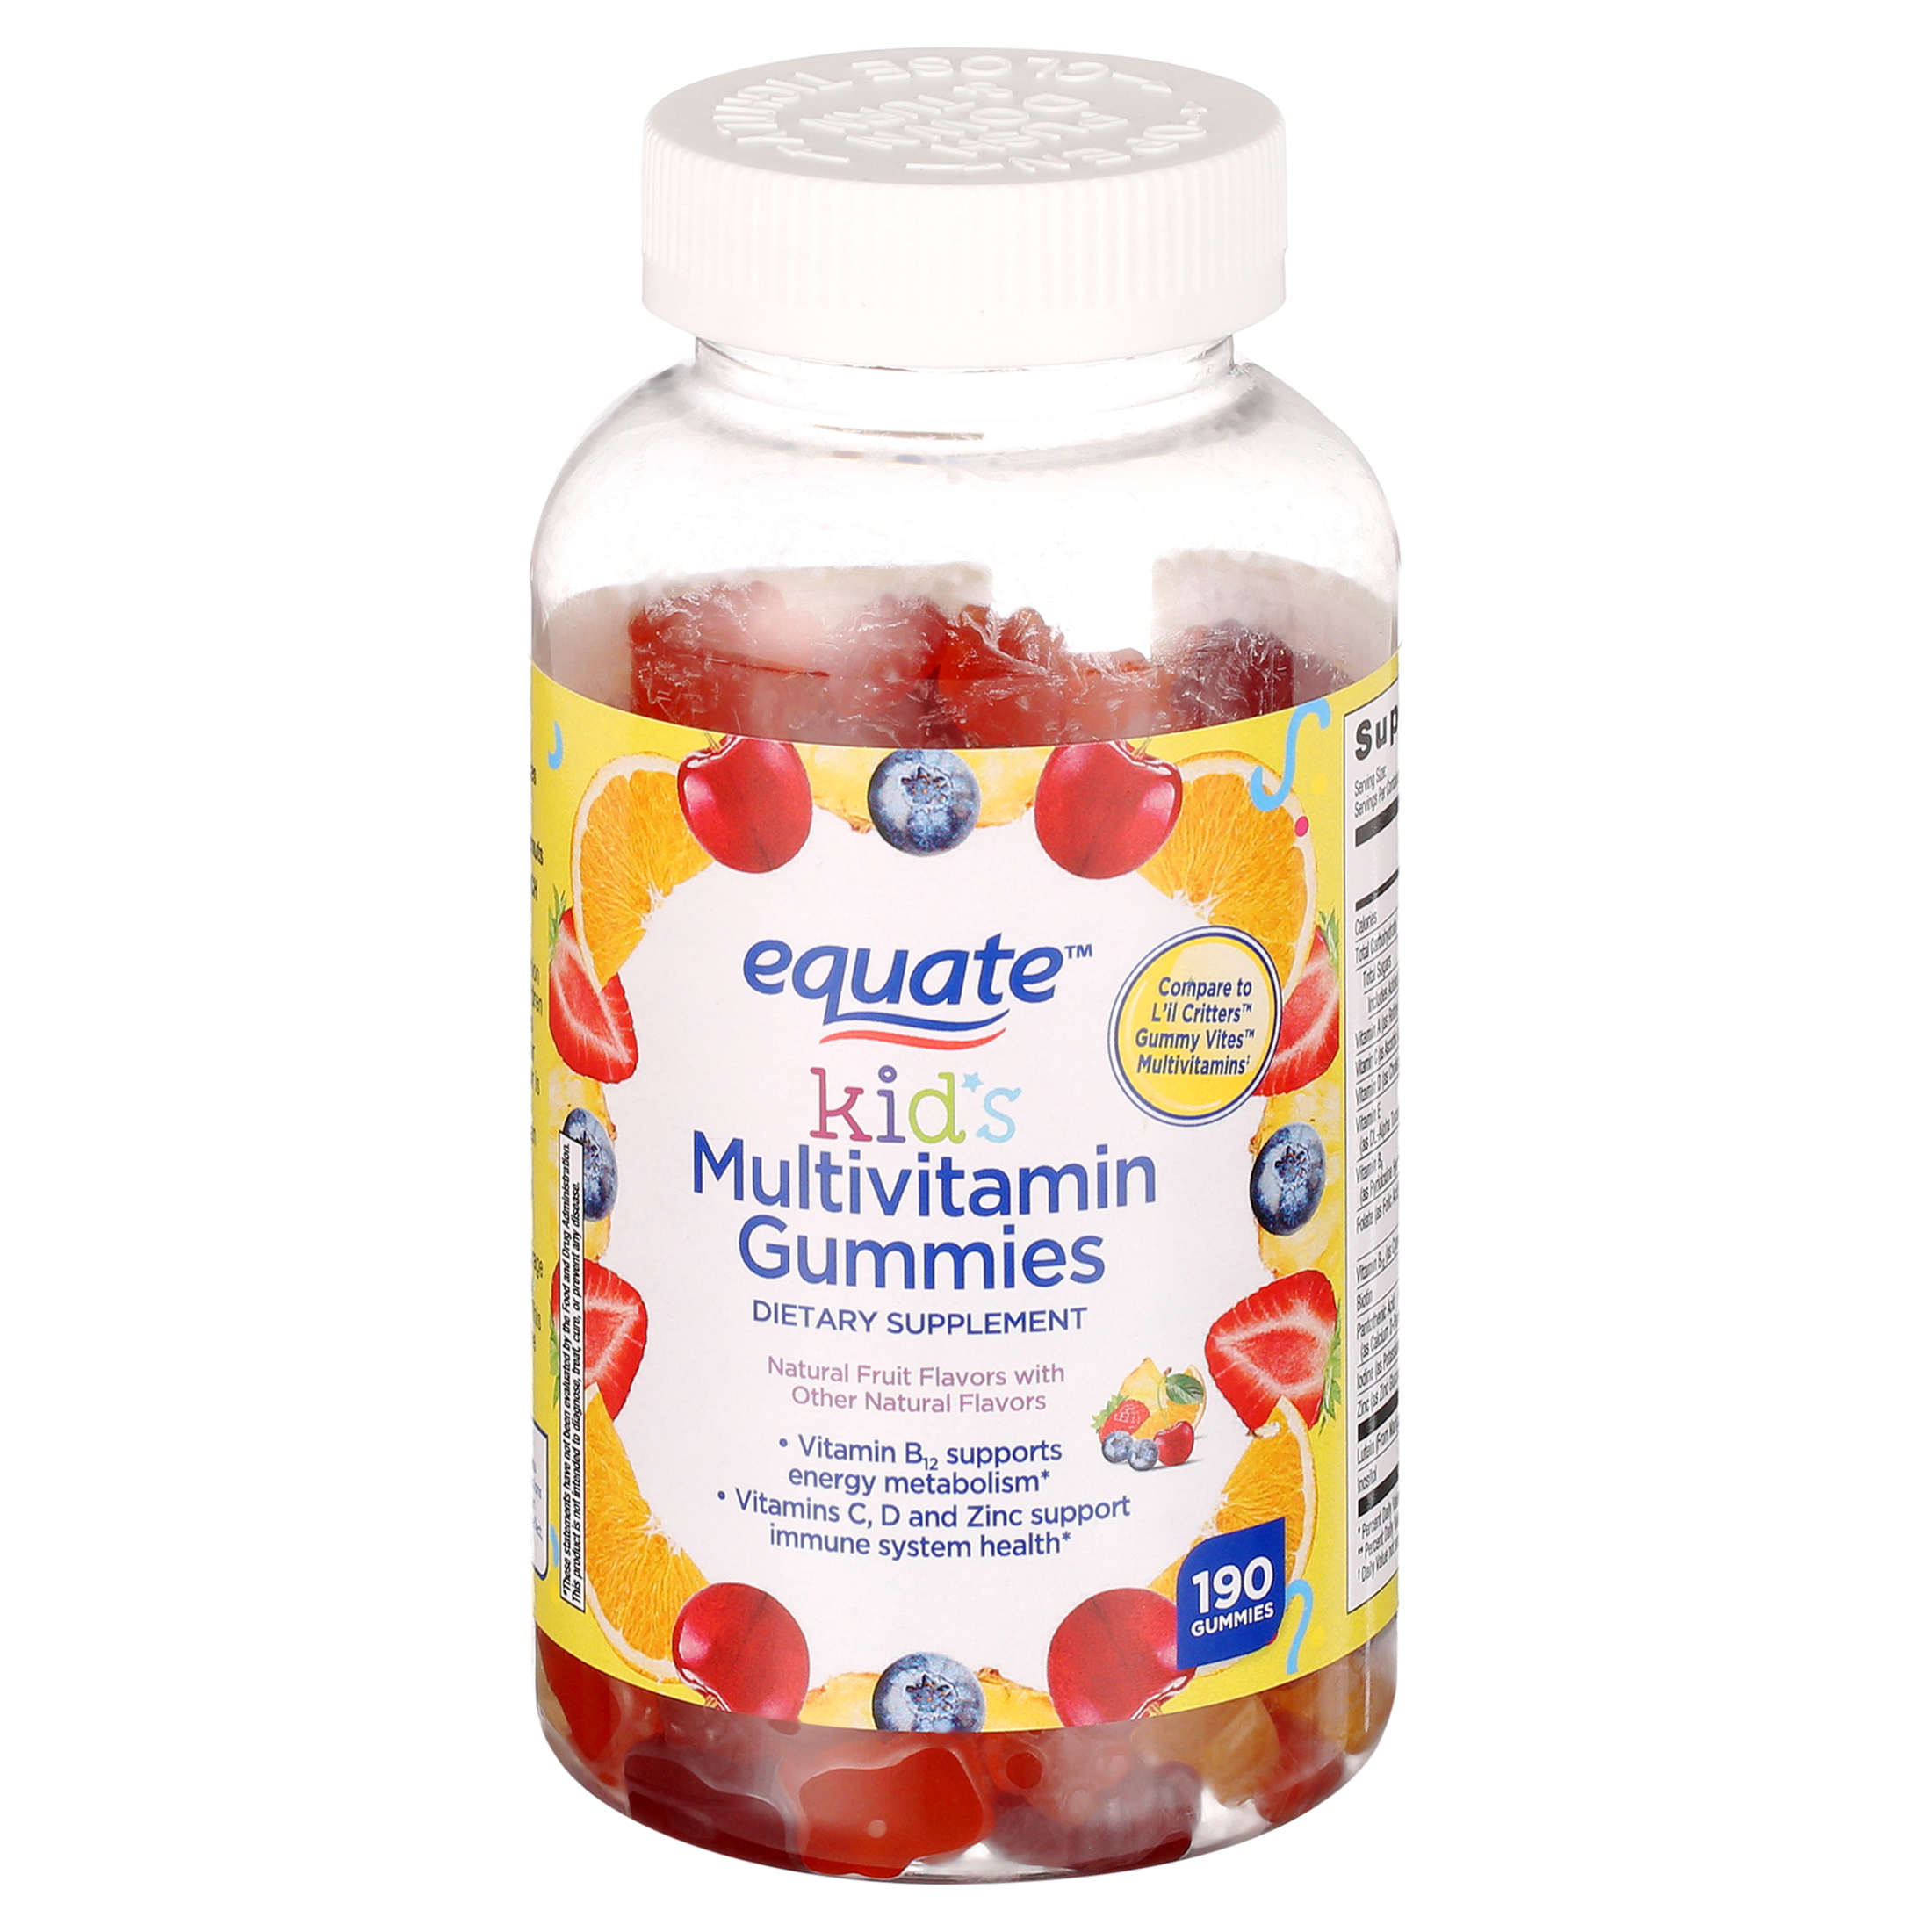 Equate Kids Multivitamin Gummies for General Health, Natural Fruit, 190 Count - image 4 of 6